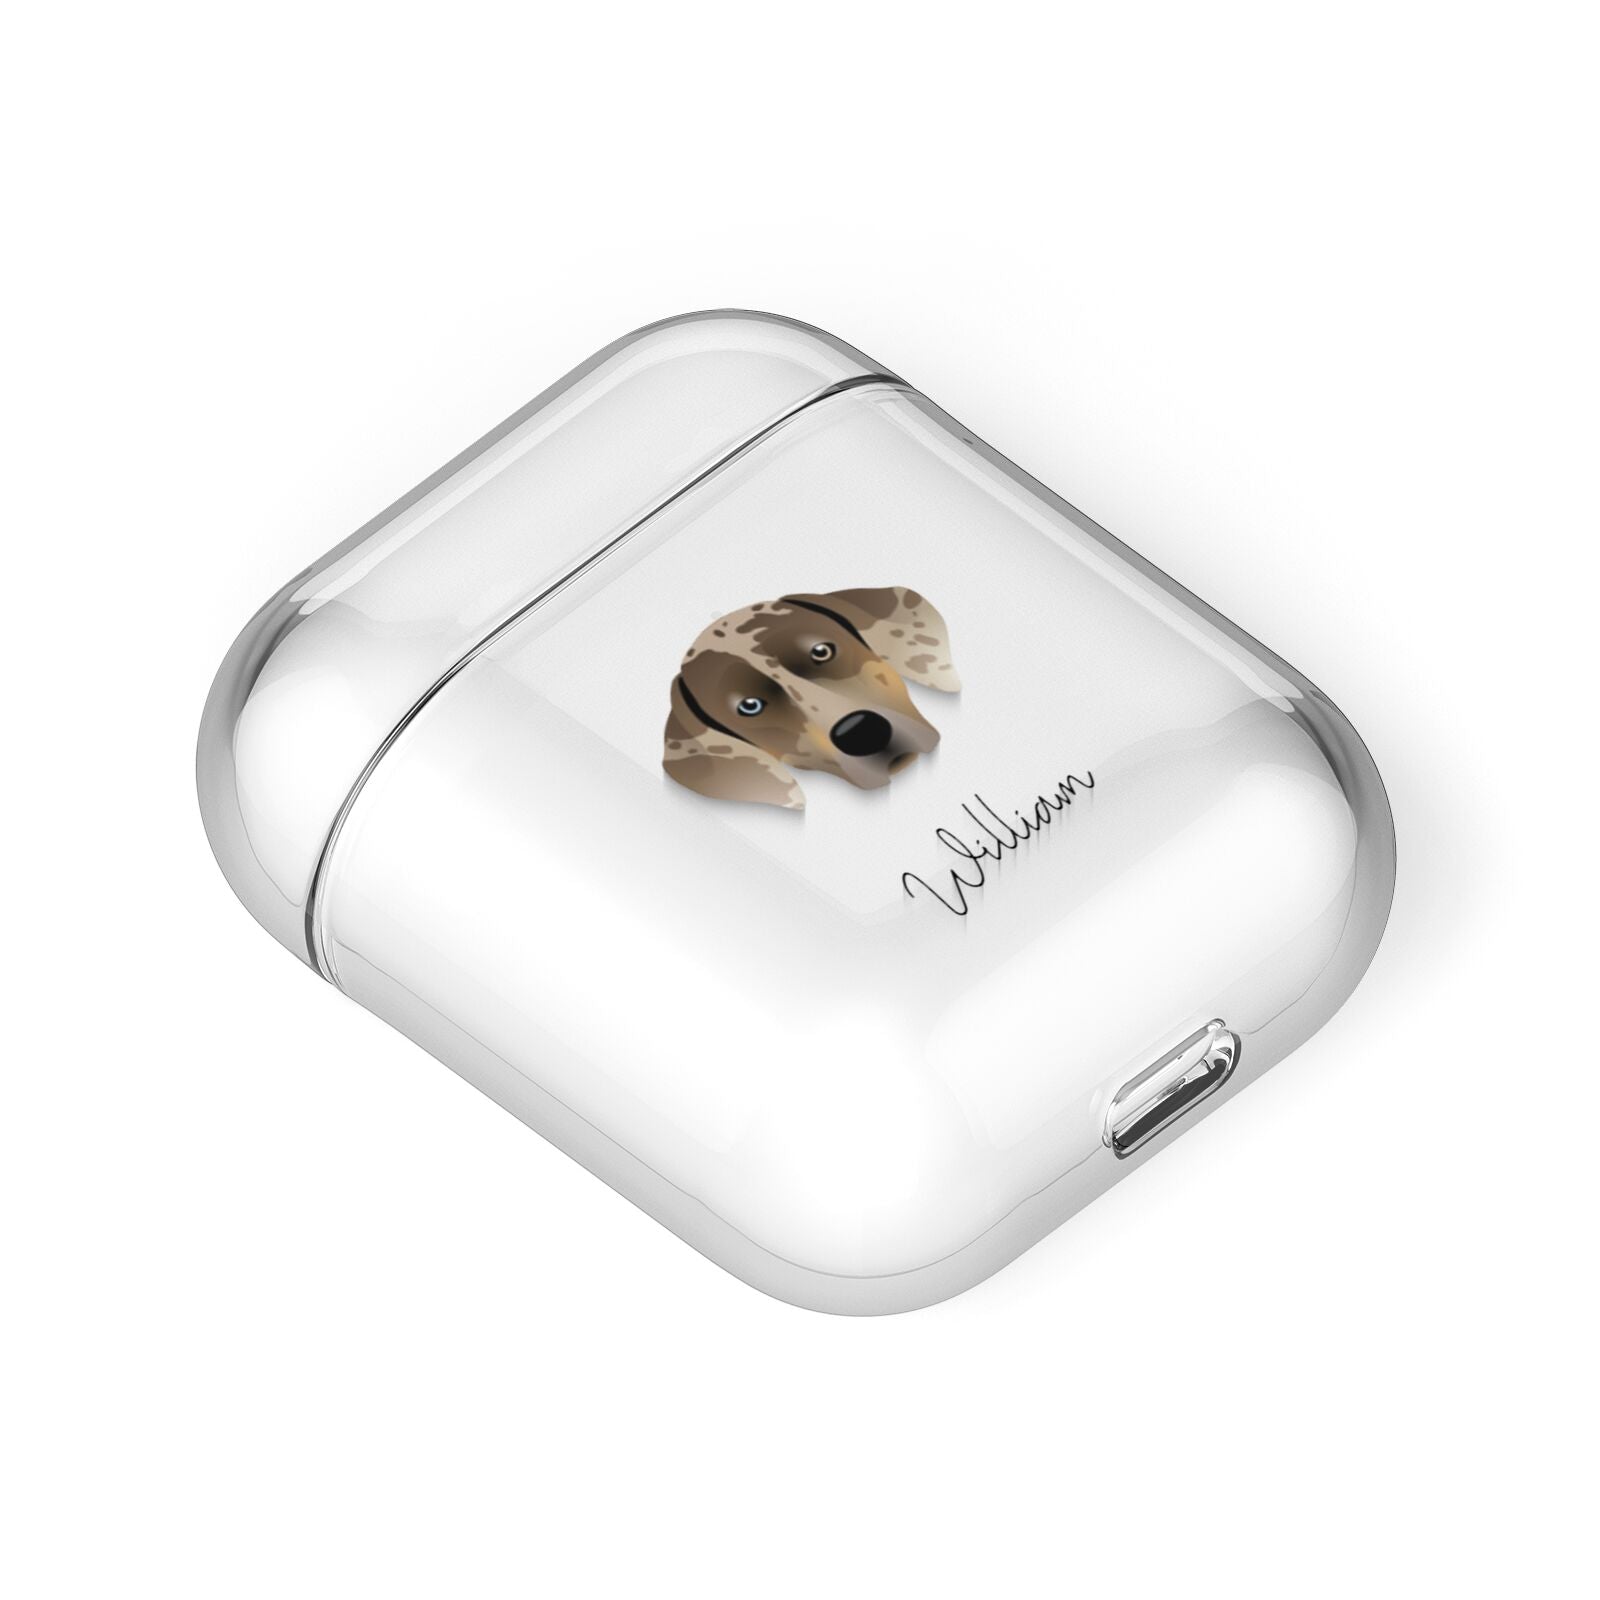 Catahoula Leopard Dog Personalised AirPods Case Laid Flat